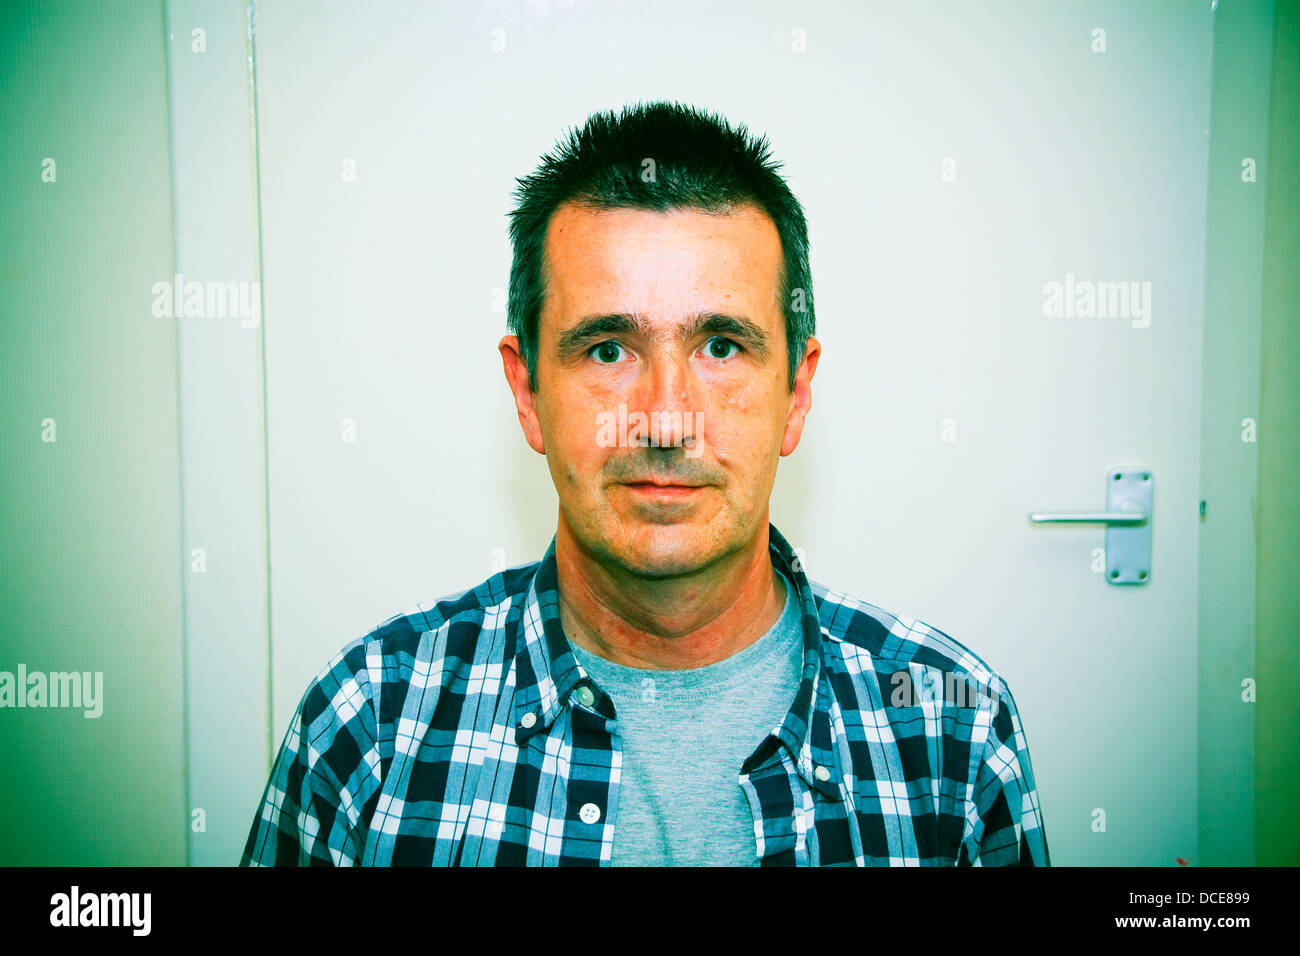 Portrait of slightly startled looking middle aged man Stock Photo